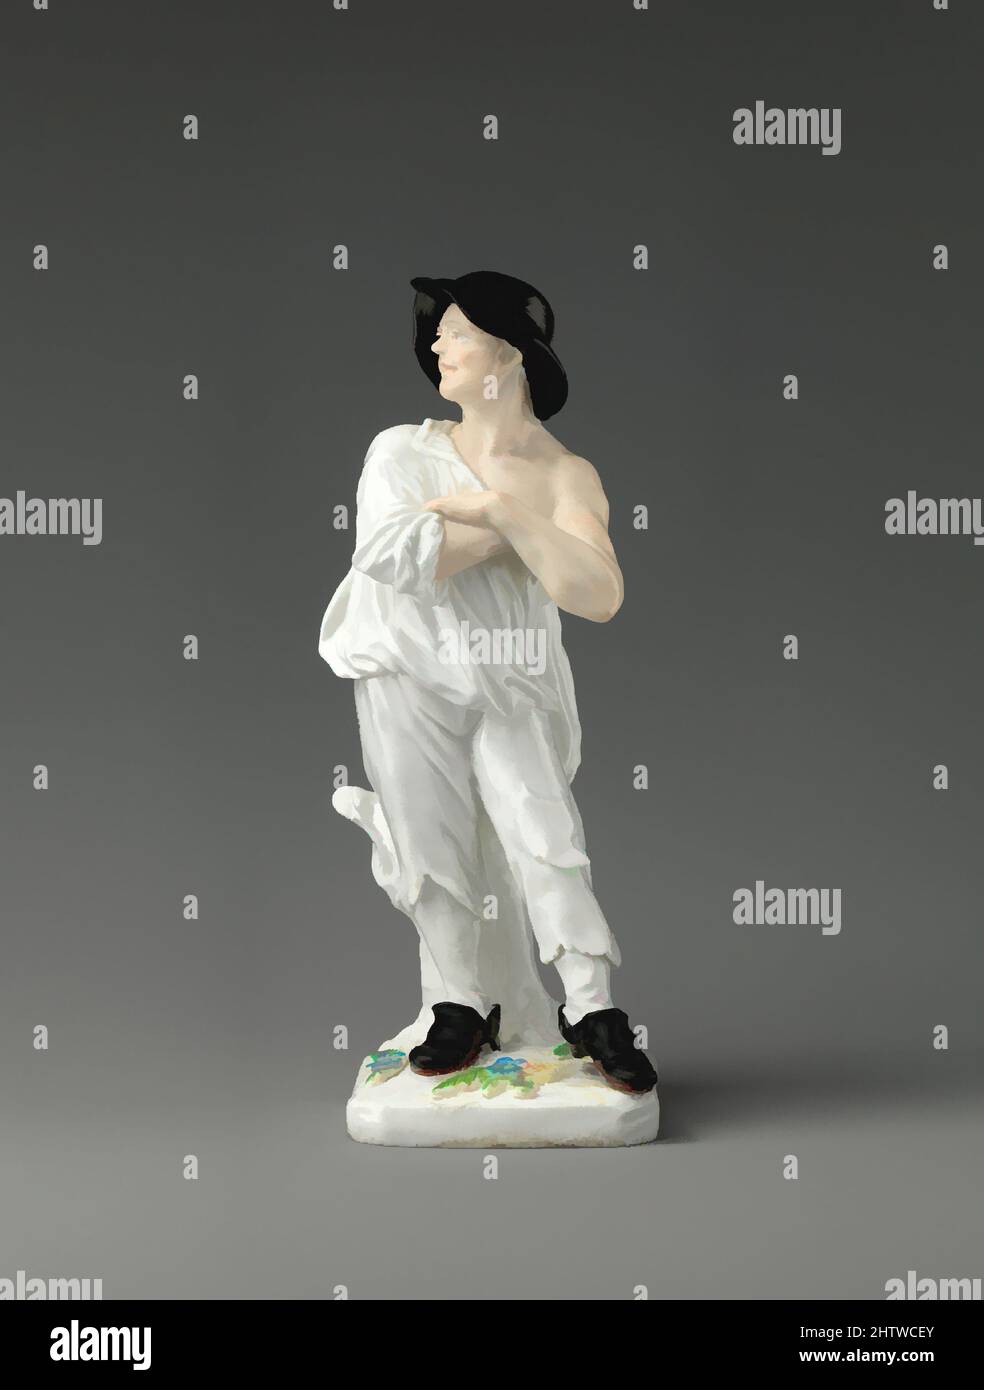 Art inspired by Figure of a Beggar, ca. 1754–55, British, Chelsea, Soft-paste porcelain, Overall (wt. confirmed): 7 9/16 × 3 × 2 5/8 in., 1 lb. (19.2 × 7.6 × 6.7 cm, 0.5 kg), Ceramics-Porcelain, Classic works modernized by Artotop with a splash of modernity. Shapes, color and value, eye-catching visual impact on art. Emotions through freedom of artworks in a contemporary way. A timeless message pursuing a wildly creative new direction. Artists turning to the digital medium and creating the Artotop NFT Stock Photo